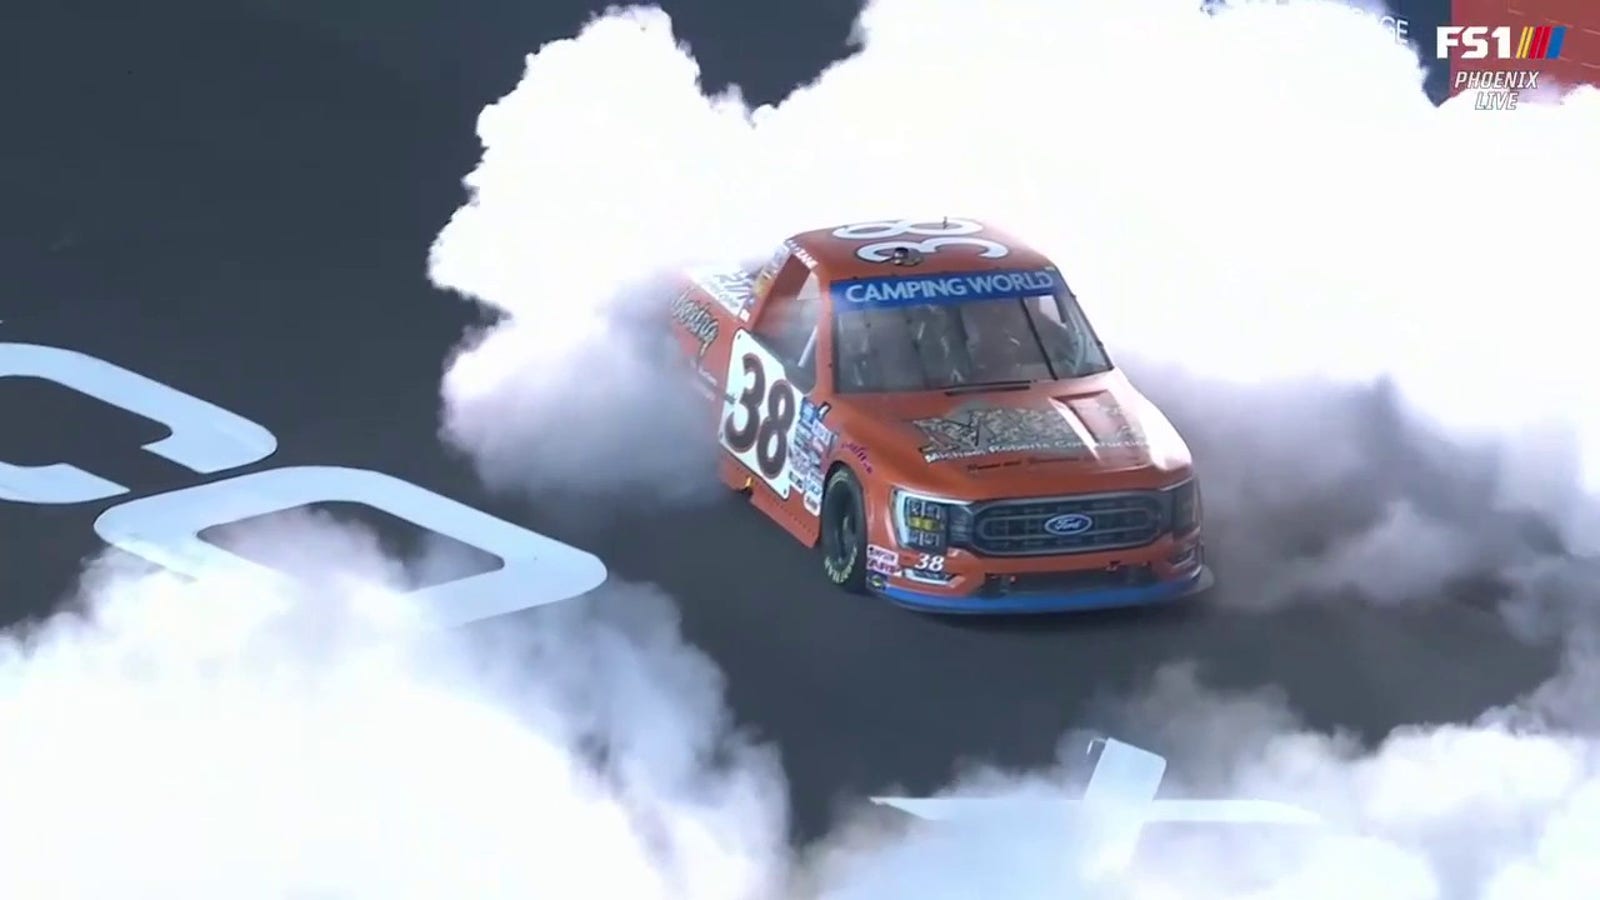 Zane Smith win the 2022 NASCAR Camping World Truck Series Championship after holding off Ben Rhodes in wild final overtime finish.